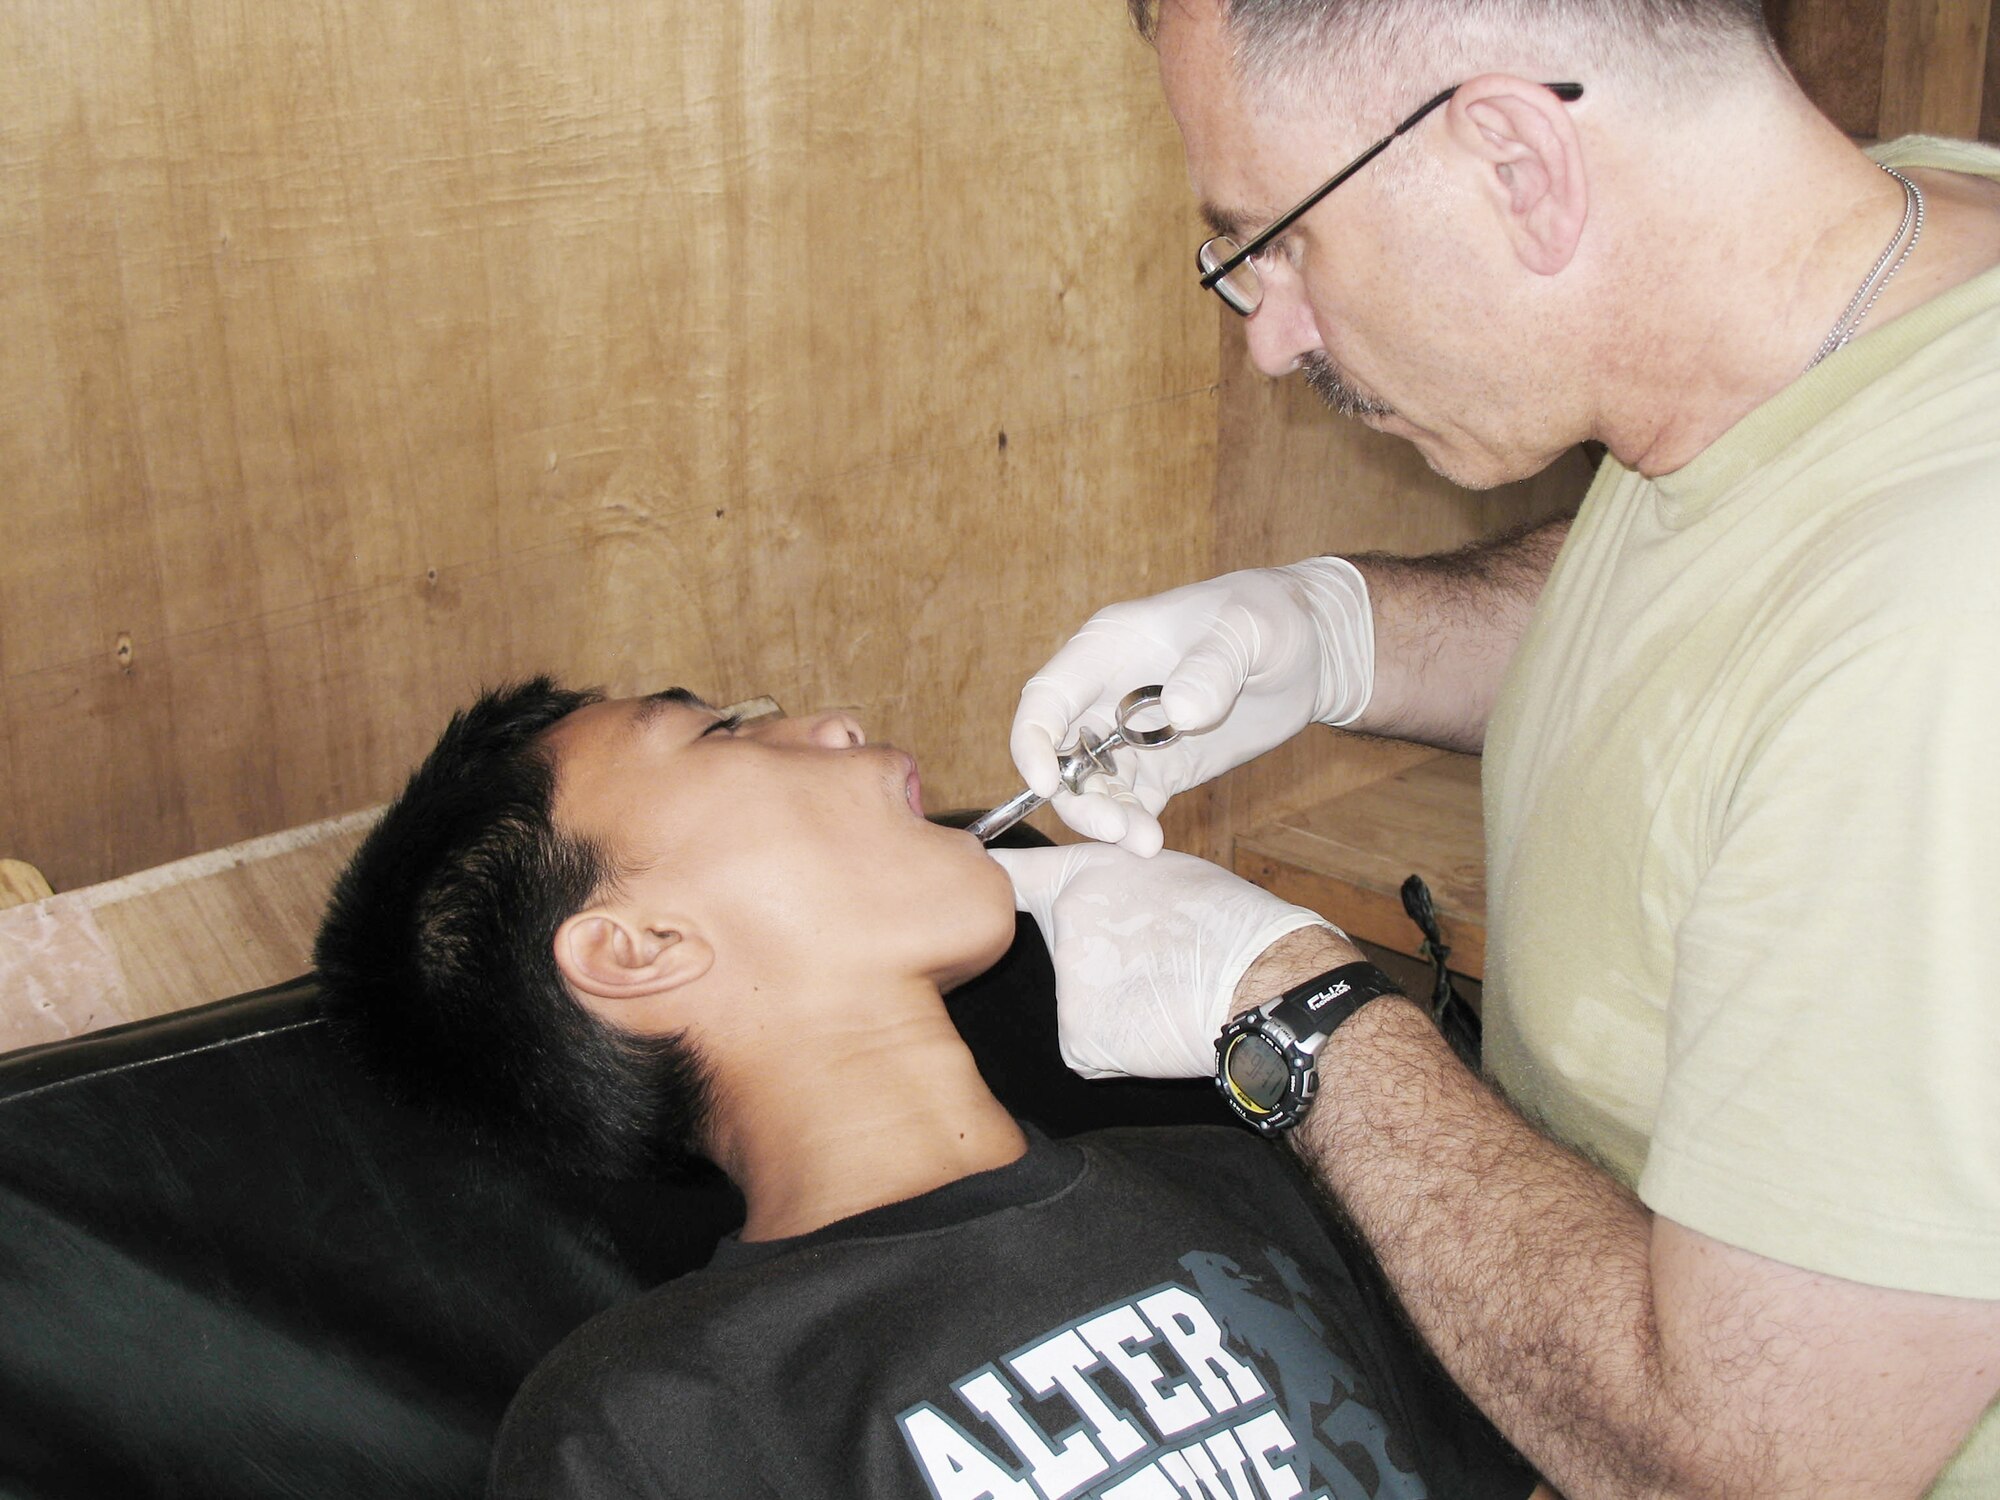 Maj. Joseph Bartle administers a dental anesthesia block to a patient receiving dental care Nov. 15, 2009, at Jolo, Philippines. Major Bartle is an orthopedic physician assistant assigned to Joint Special Operations Task Force-Philippines Forward surgical team. (U.S. Air Force photo)
